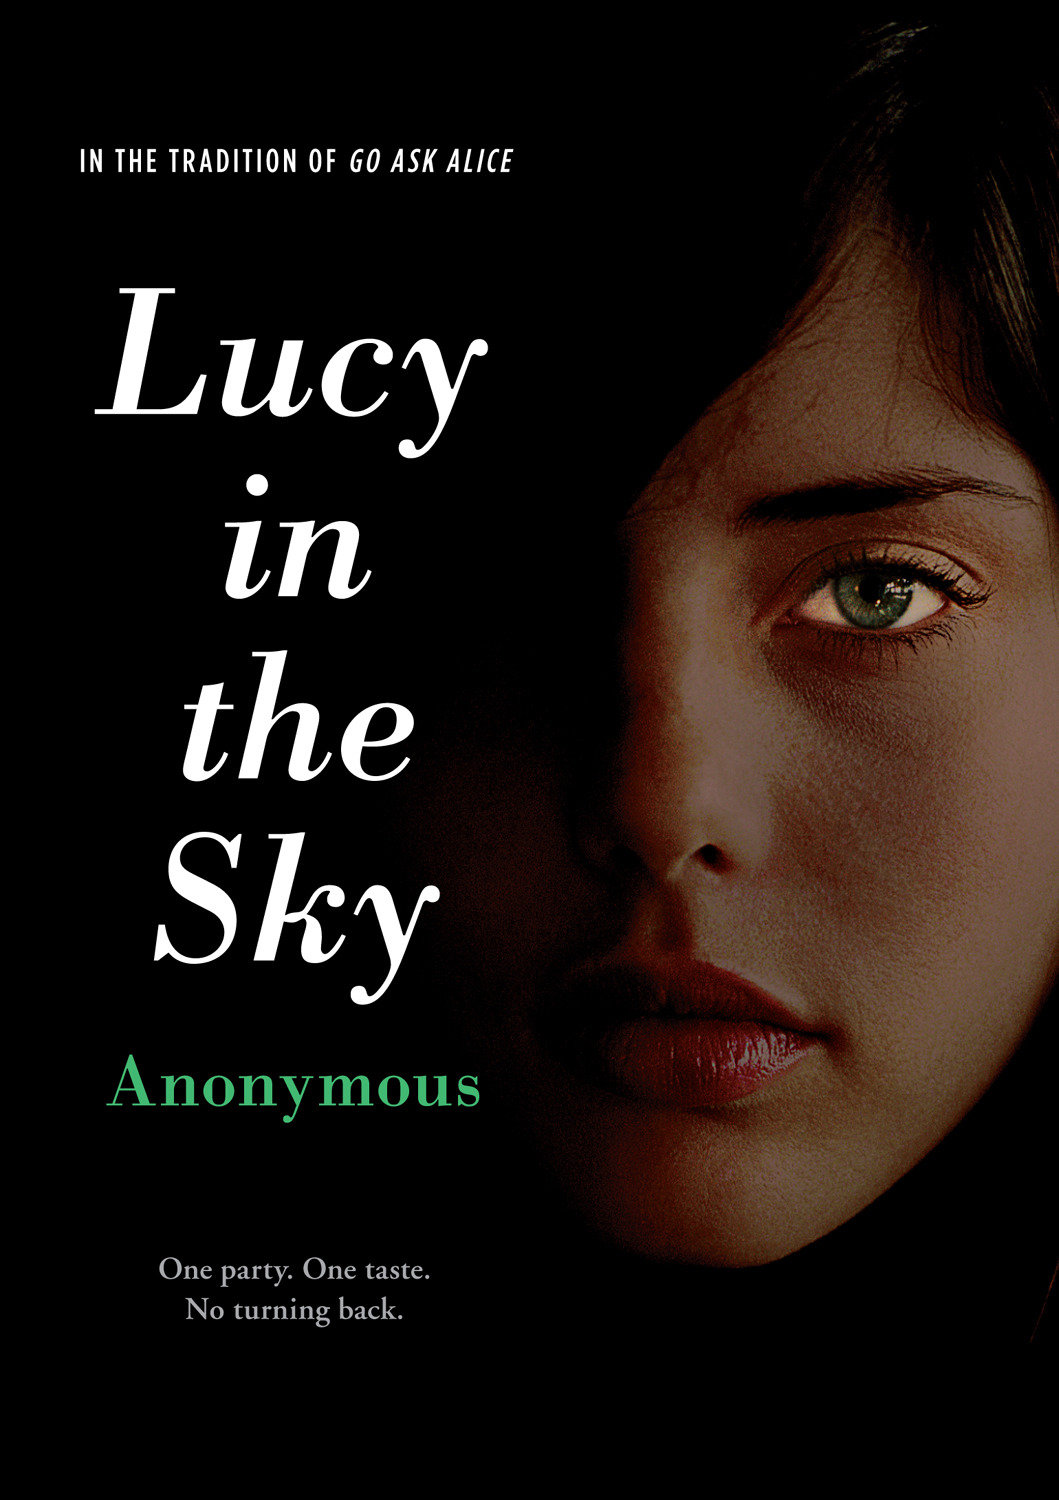 Lucy in the Sky by Anonymous